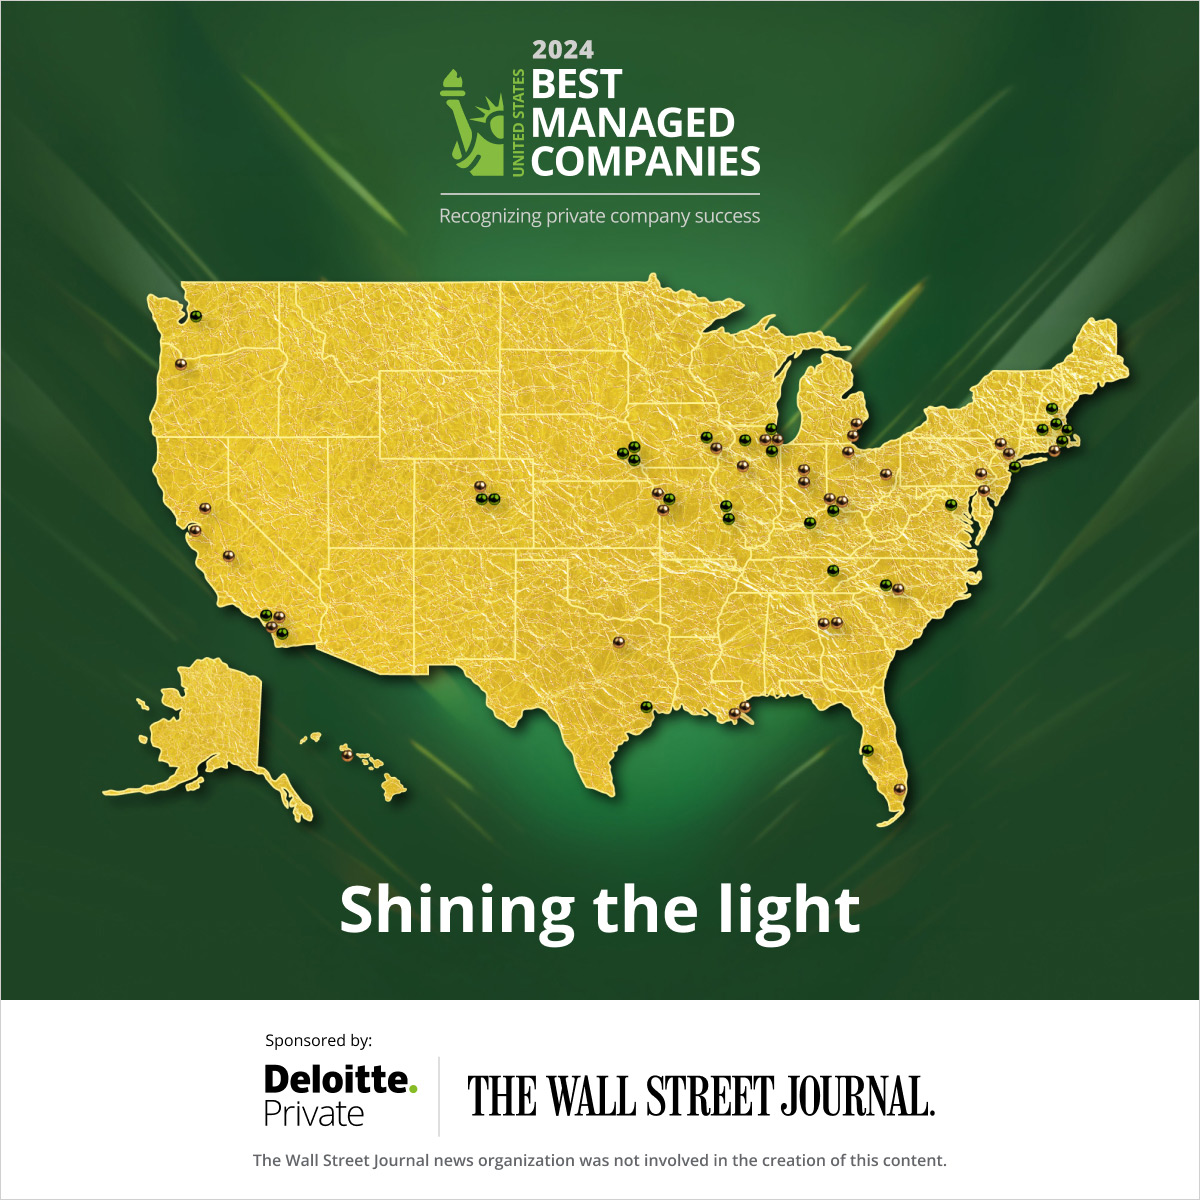 We’re honoring 62 #privatecompanies across the US for being dedicated to excellence, making an impact, and inspiring others. #USBestManagedCompanies deloi.tt/3UoPgwh